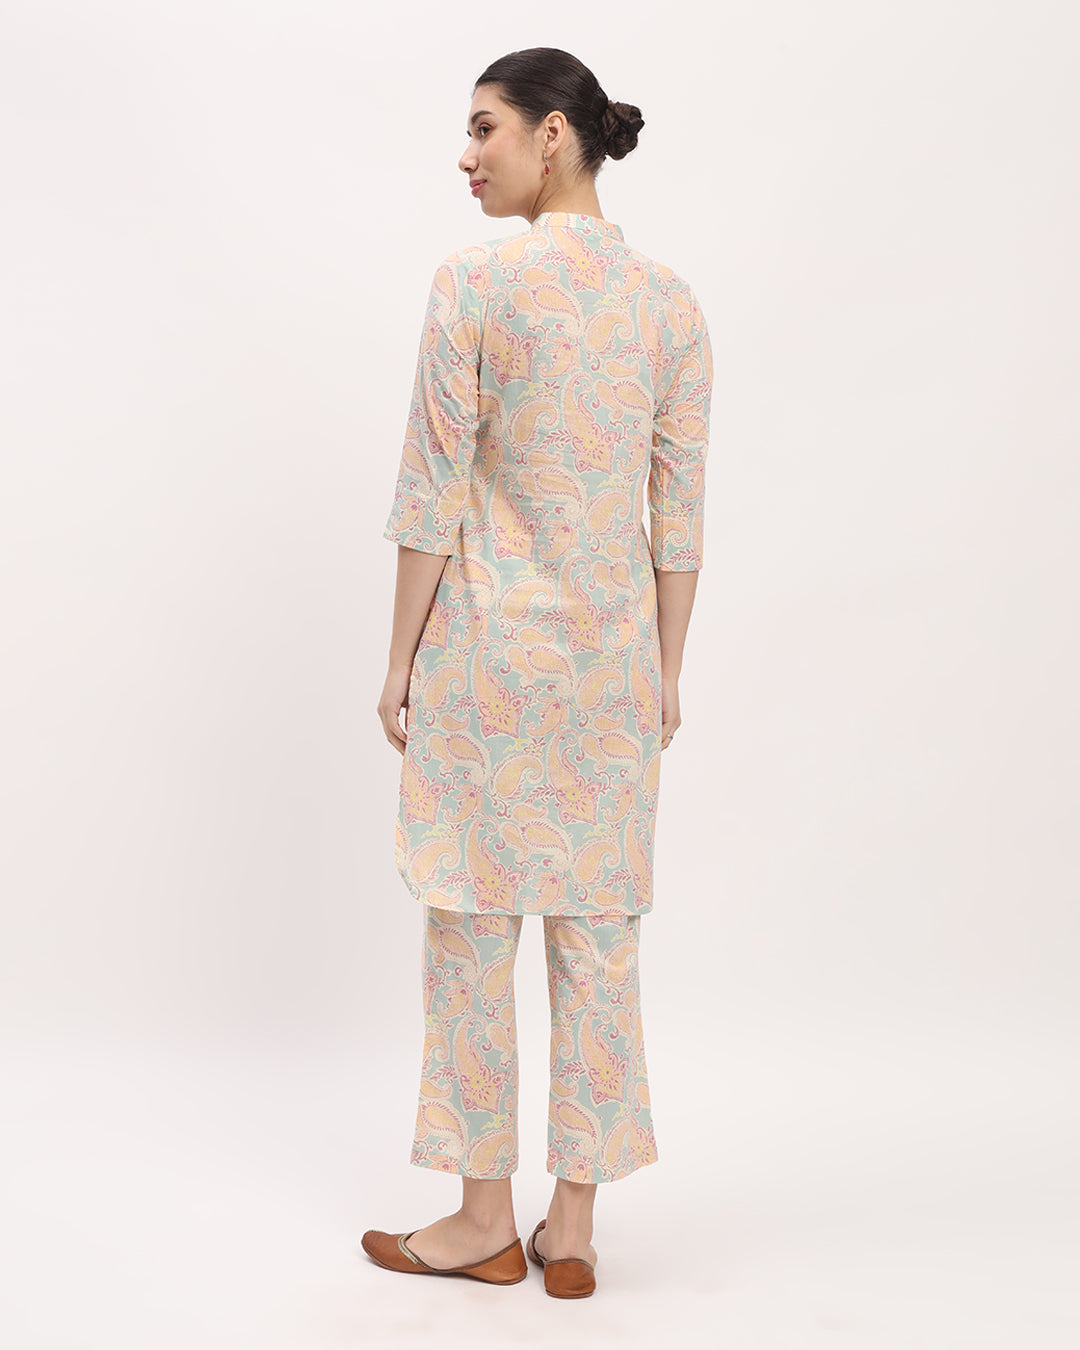 Combo: English Floral Garden & Blue Tiffany Band Collar Neck Printed Kurta (Without Bottoms)